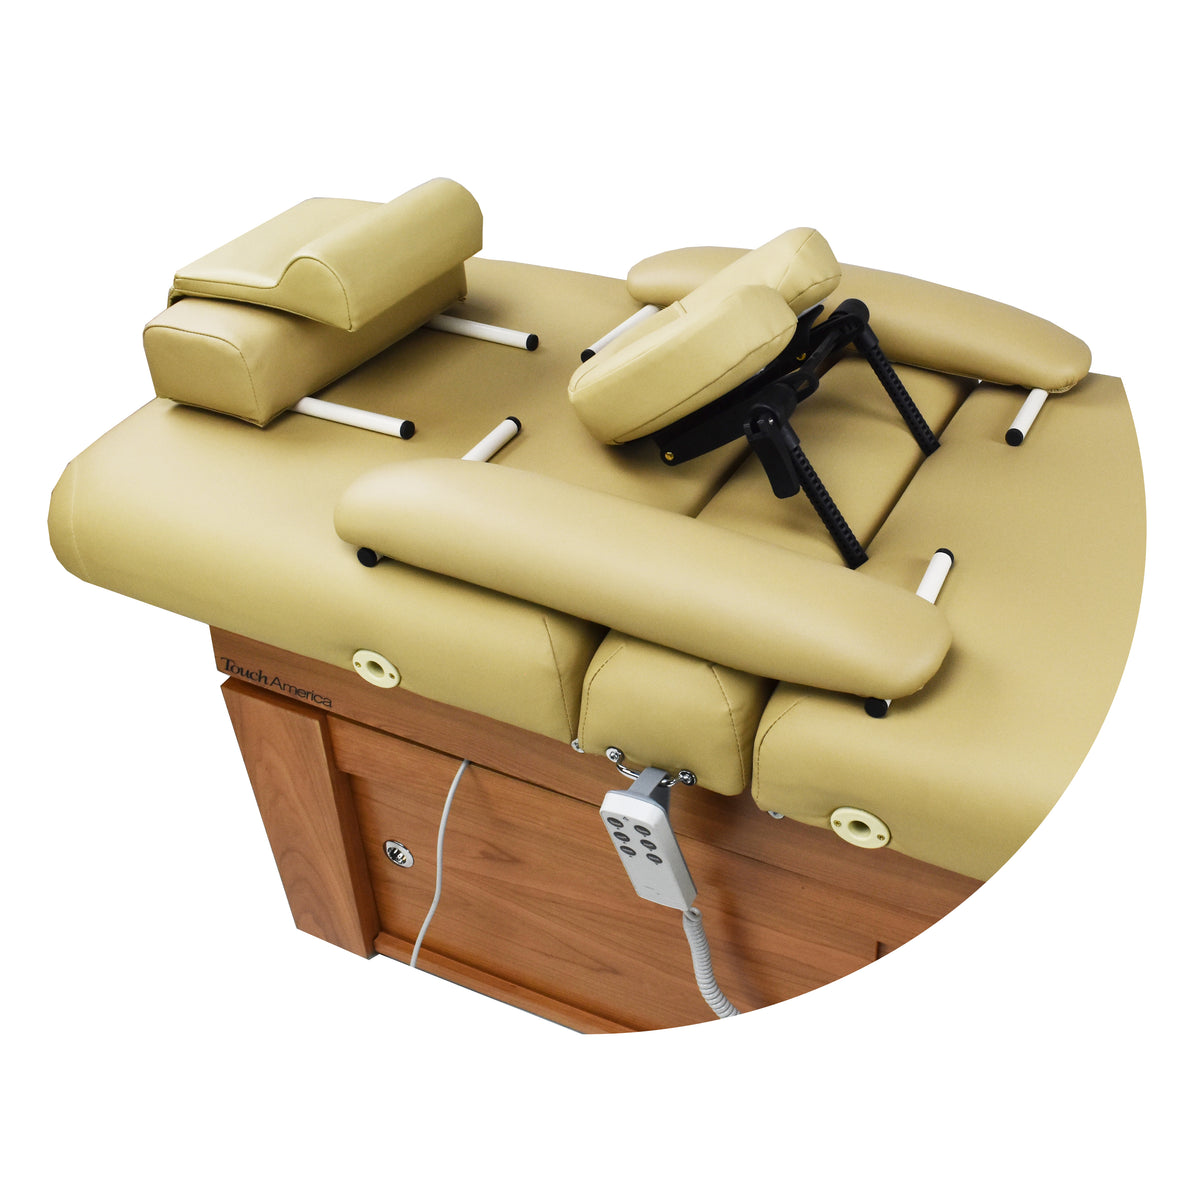 Touch America - High End Accessory Package - Superb Massage Tables